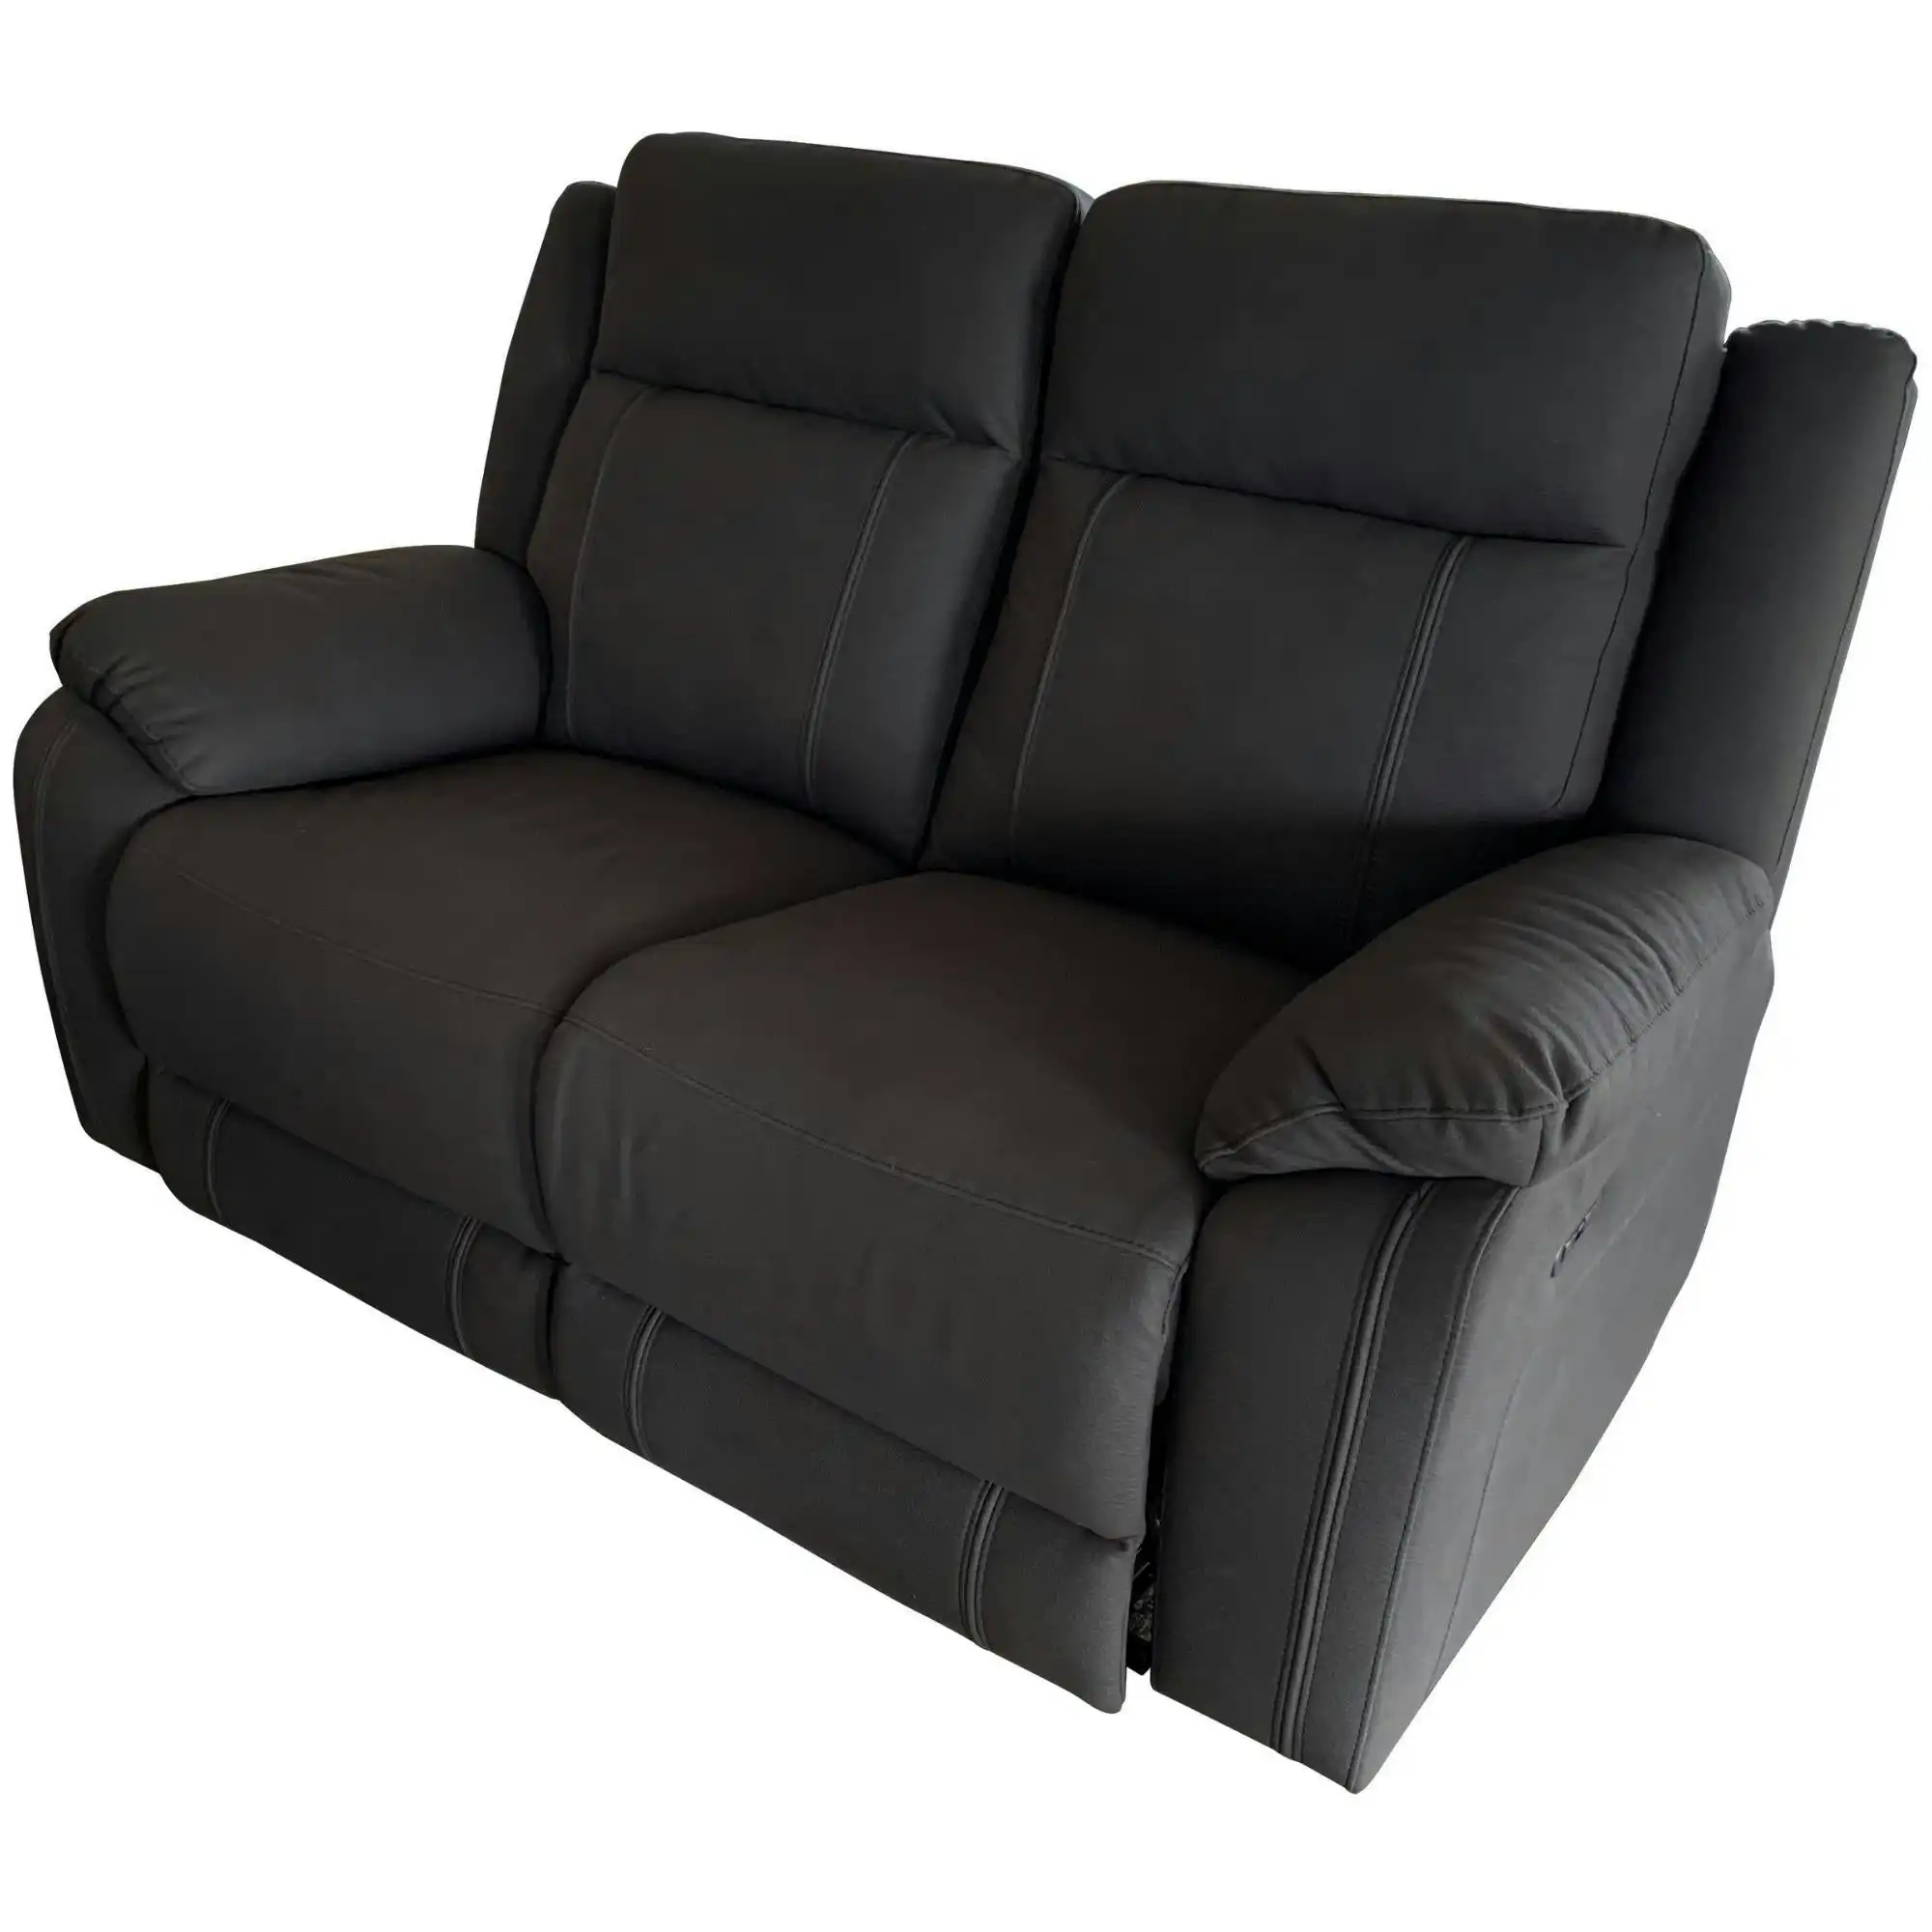 Victor 2 Seater Electric Recliner Sofa Lounge Onyx